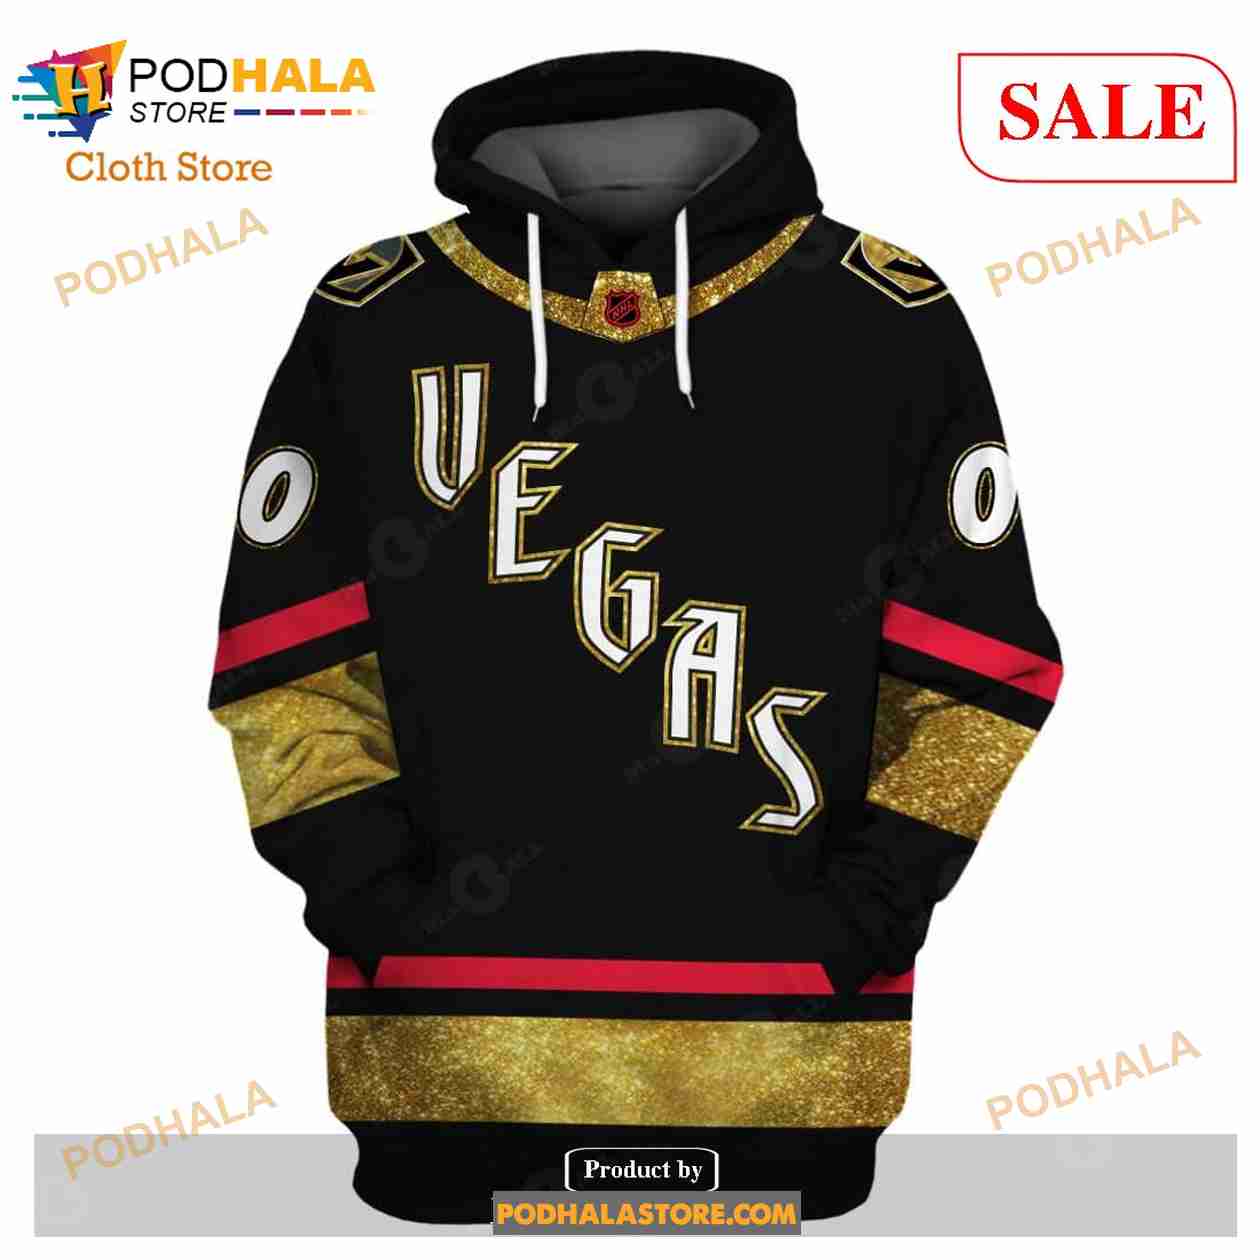 Vegas Golden Knights on X: if you call this sweater ugly we